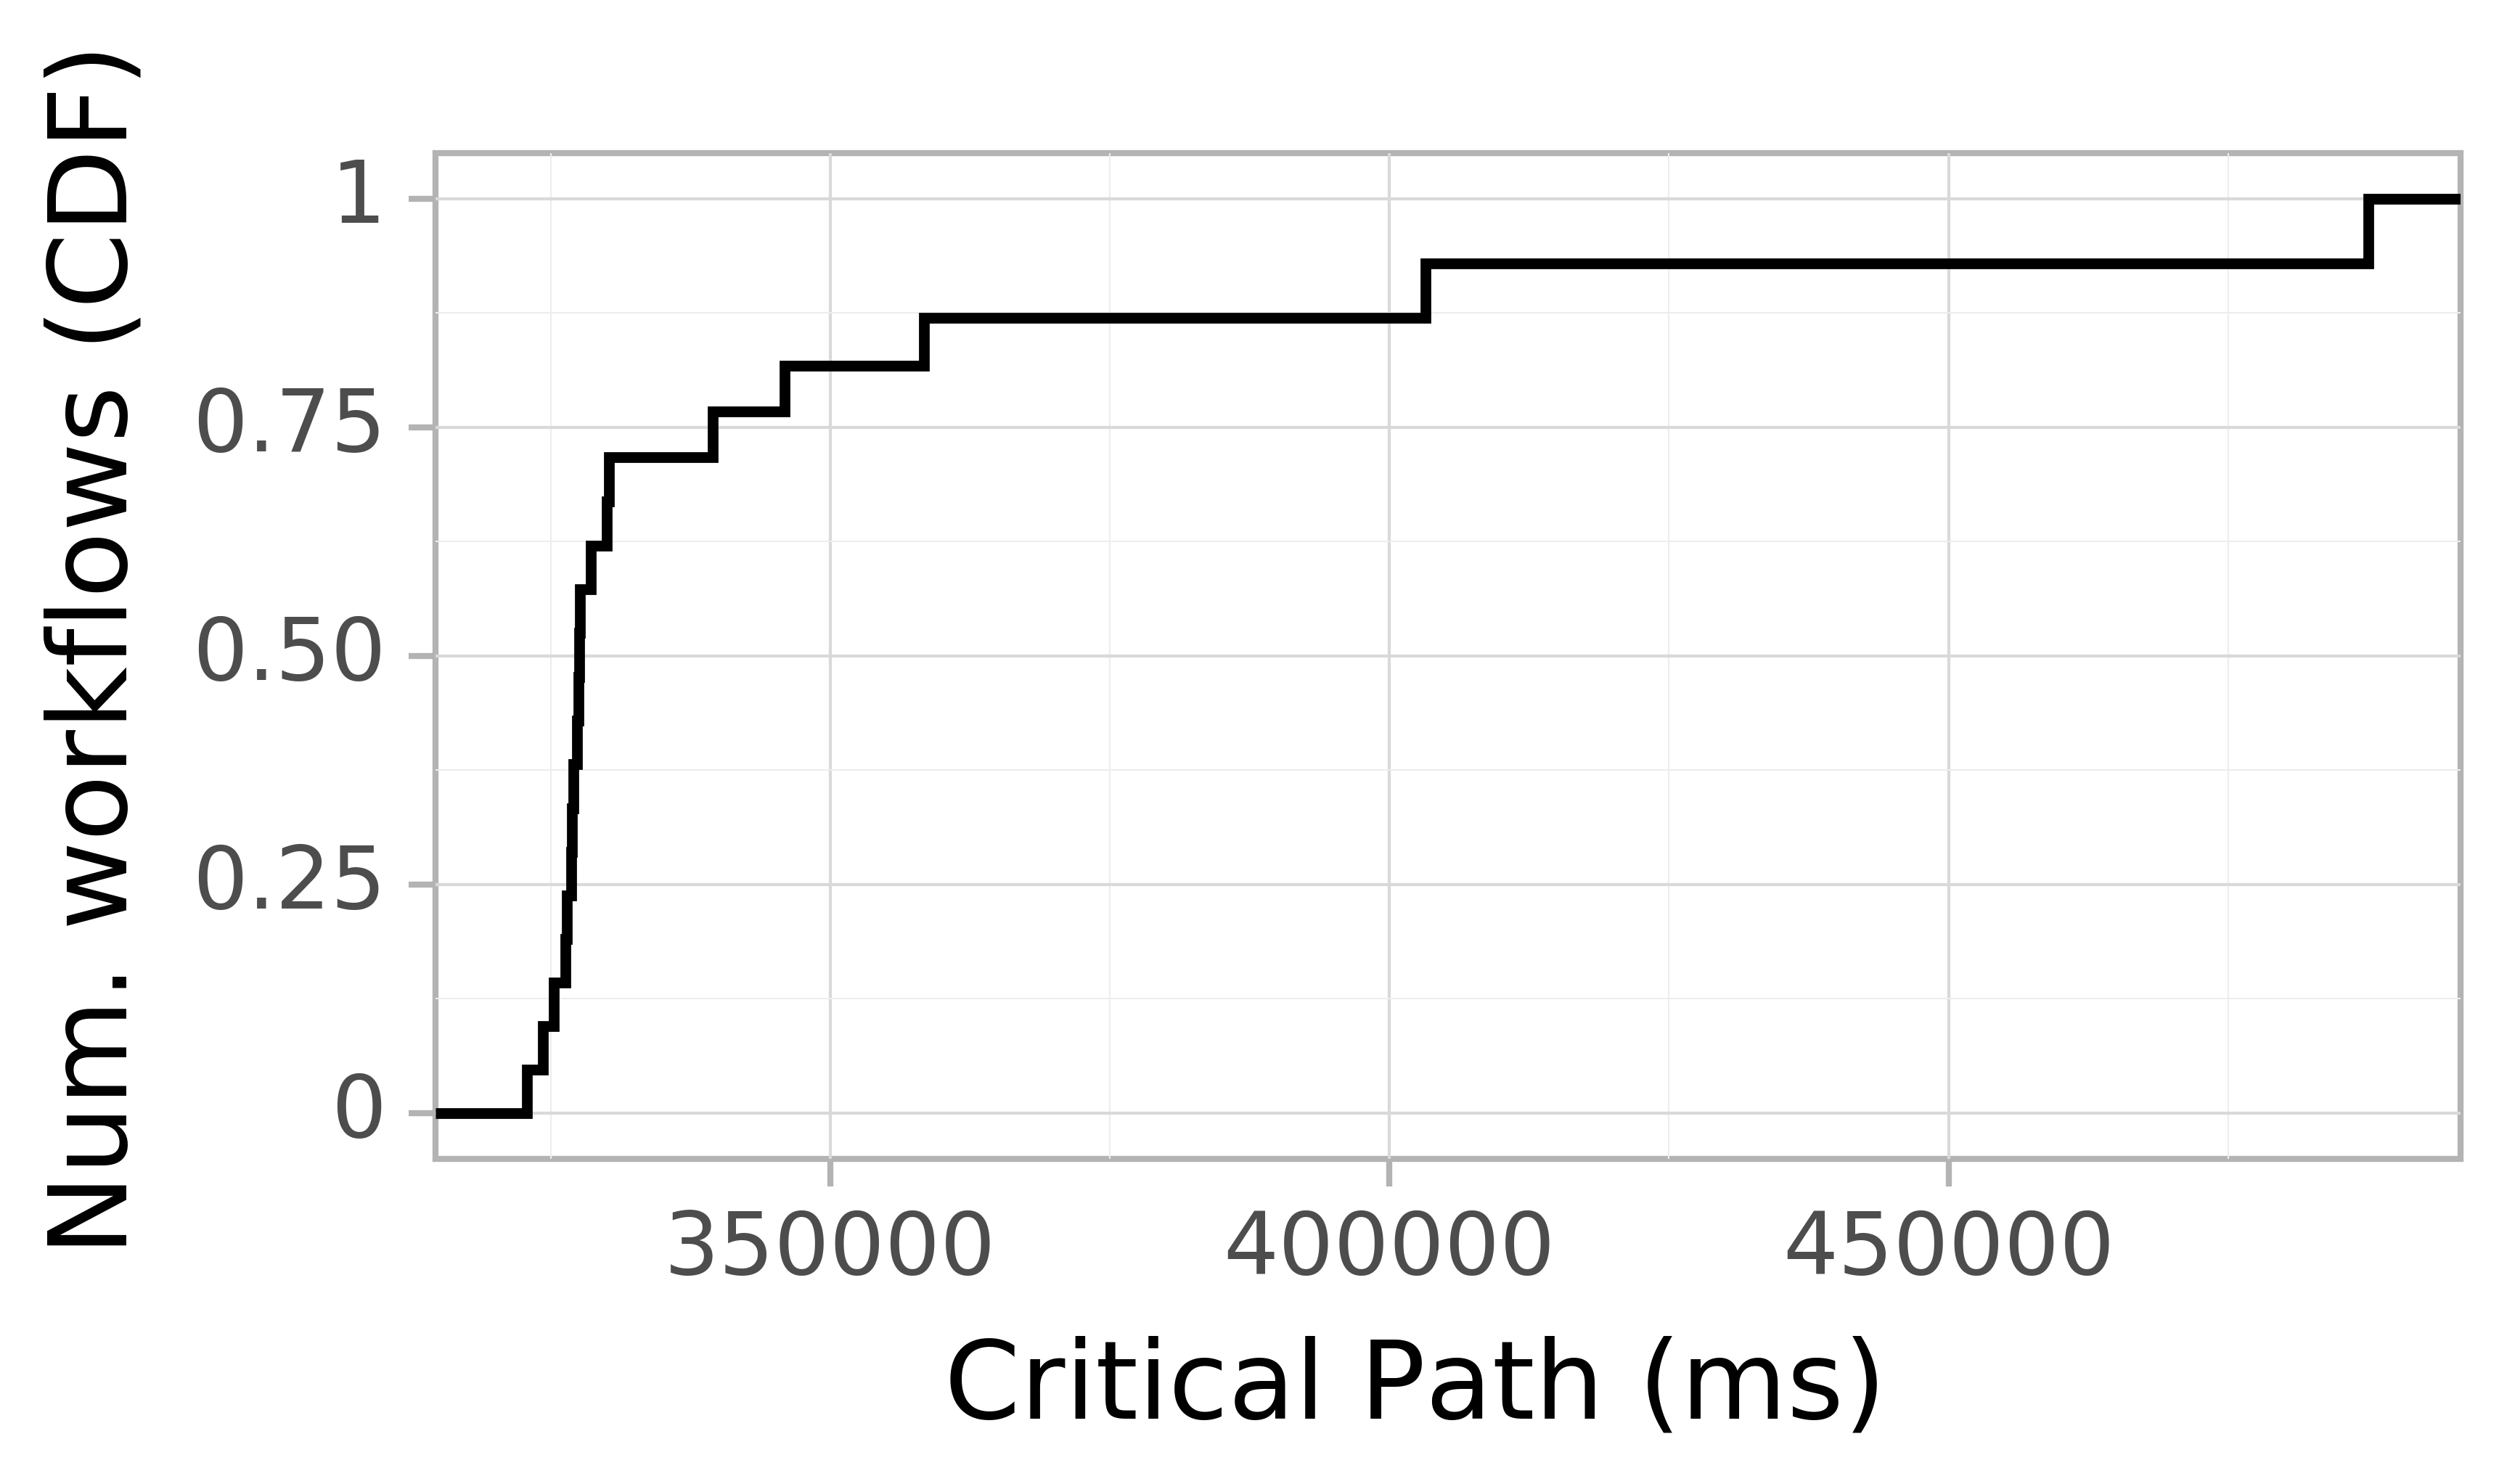 Job runtime CDF graph for the askalon-new_ee17 trace.